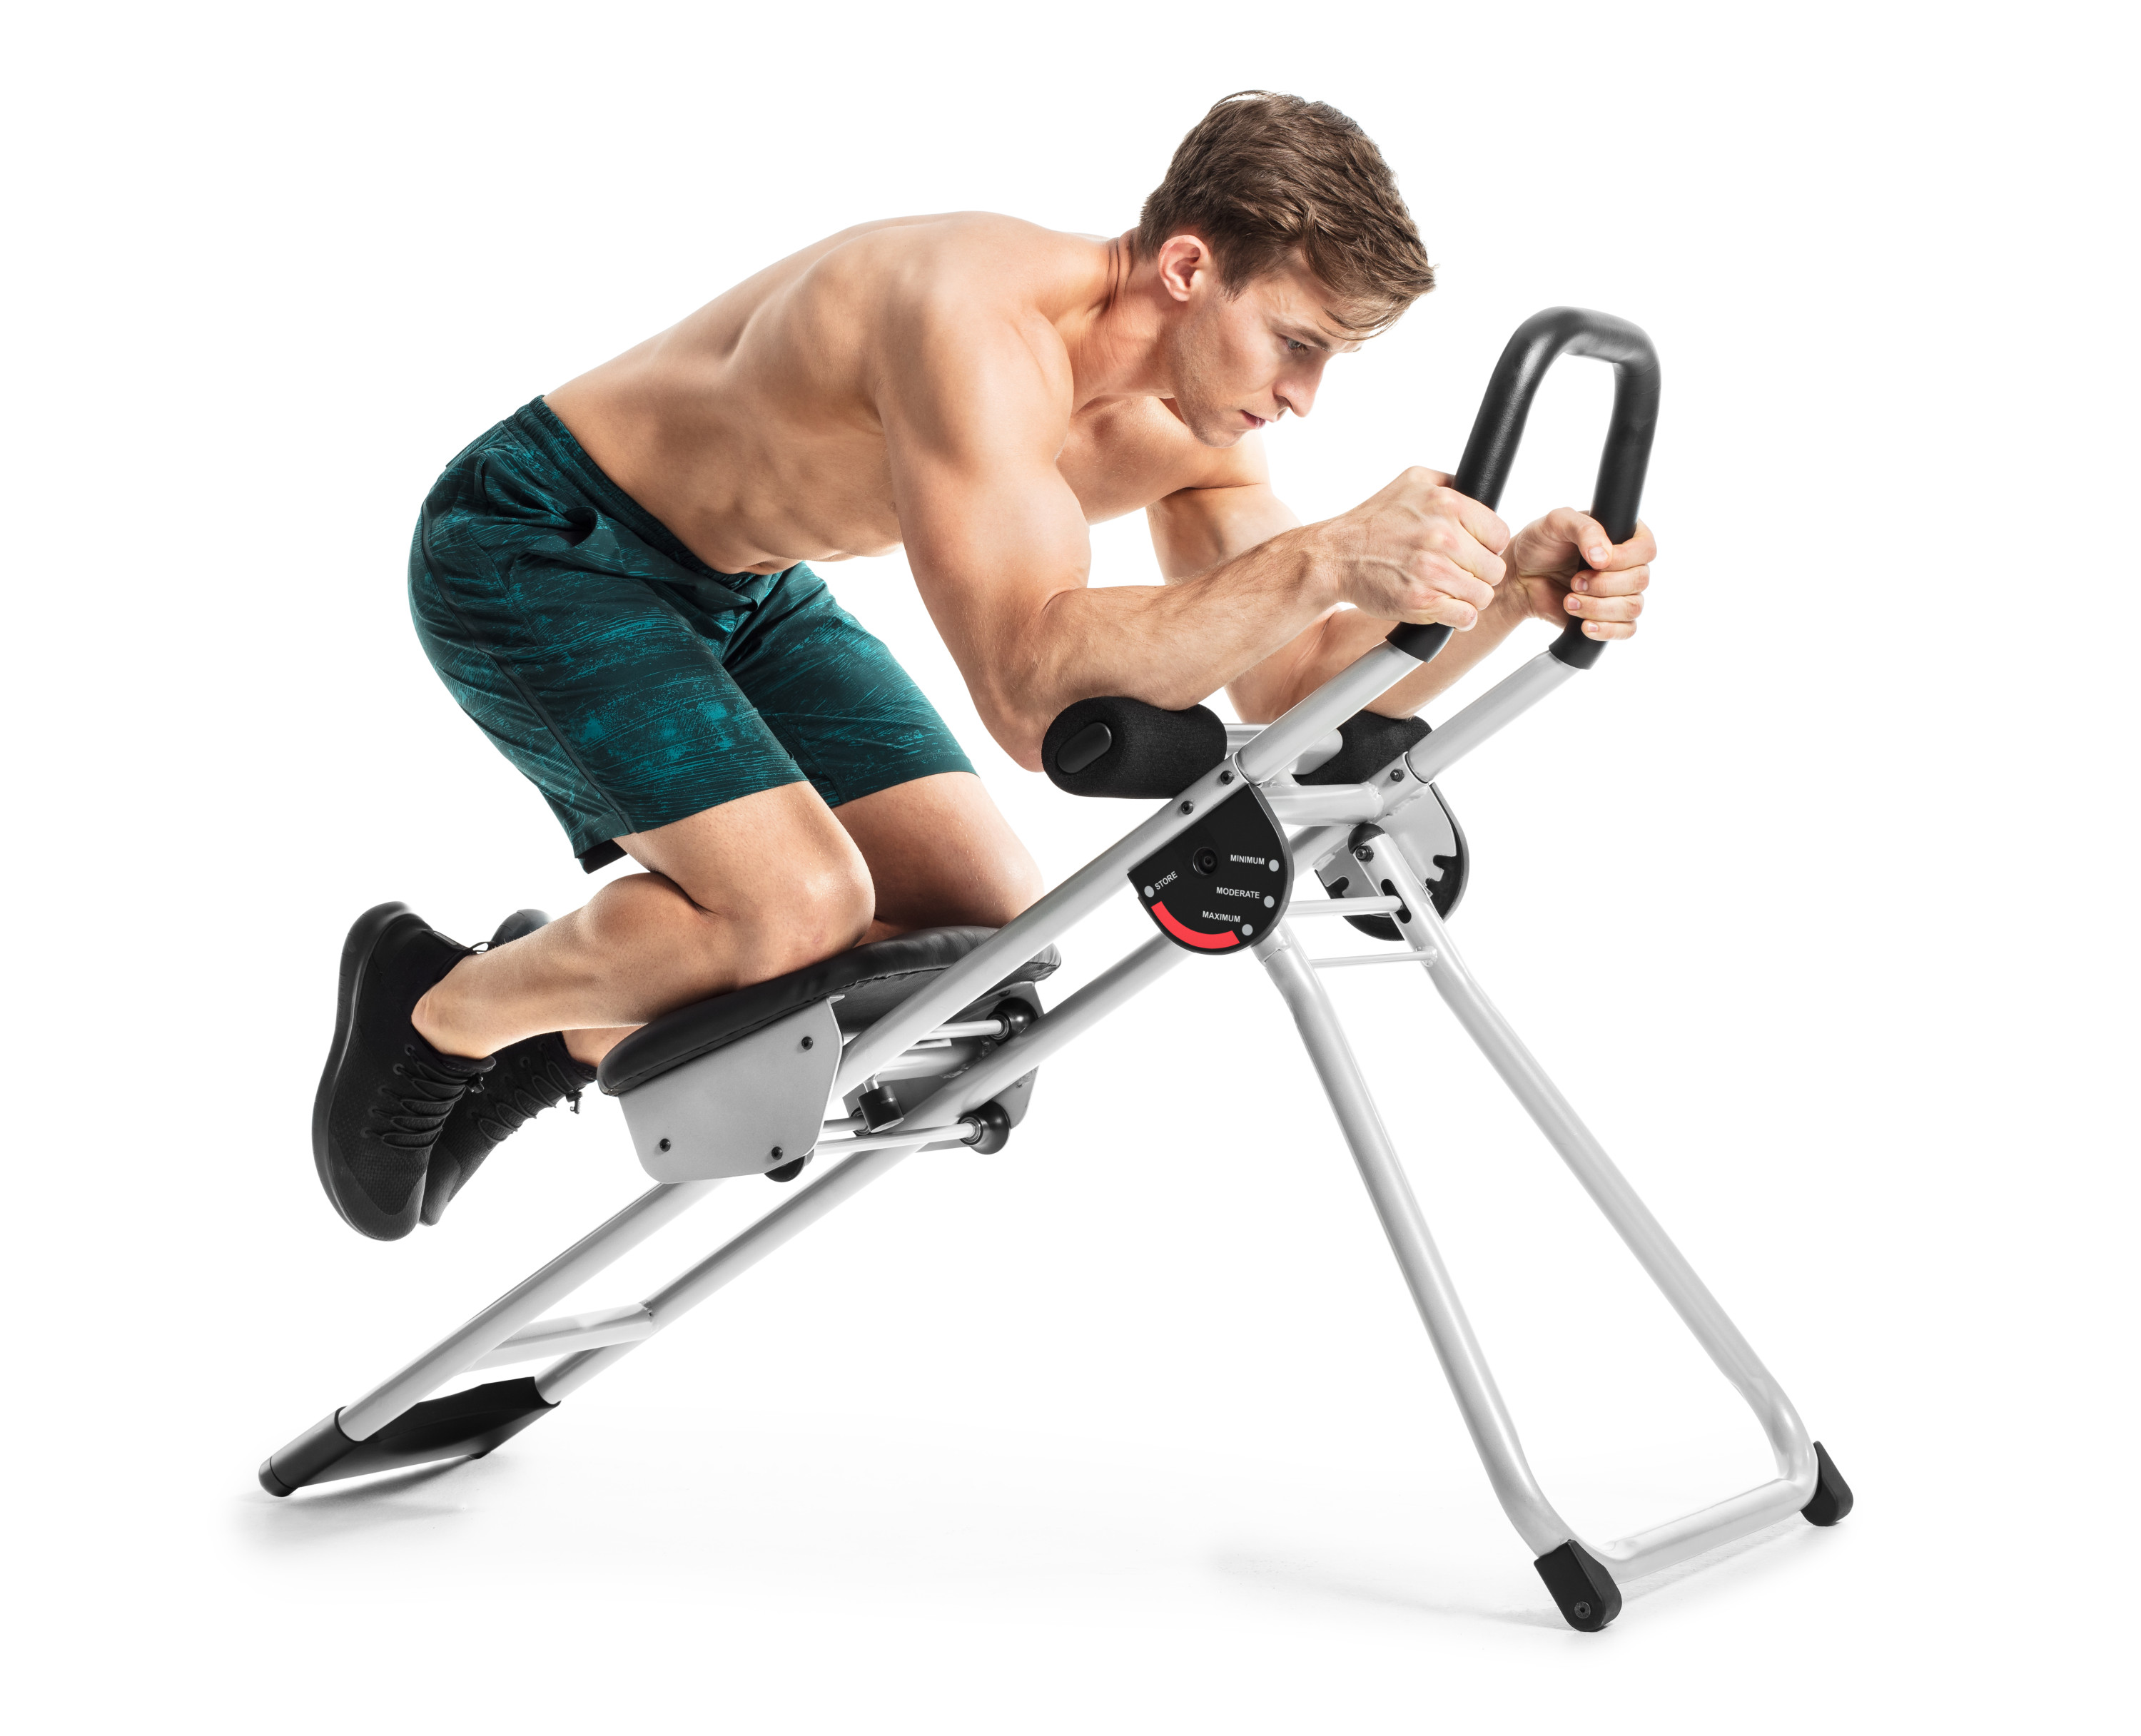 ProForm Ab Trax Core Trainer with Included Exercise Chart and SpaceSaver Design - image 6 of 20